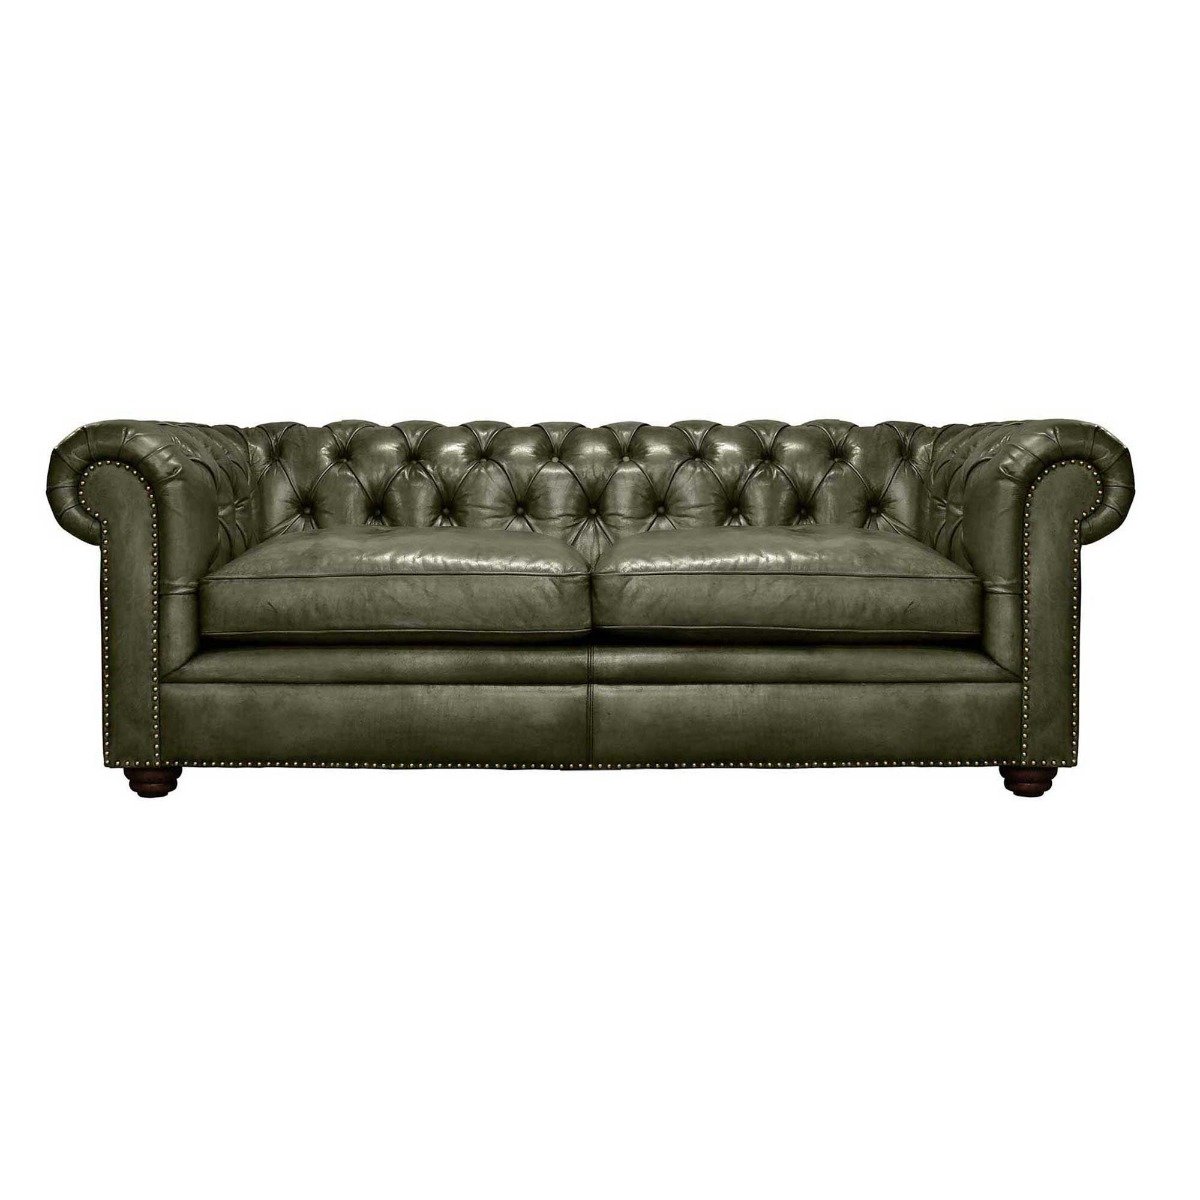 Pure Furniture Winslow Chesterfield Sofa 190cm With Wooden Legs, Green Leather | Barker & Stonehouse